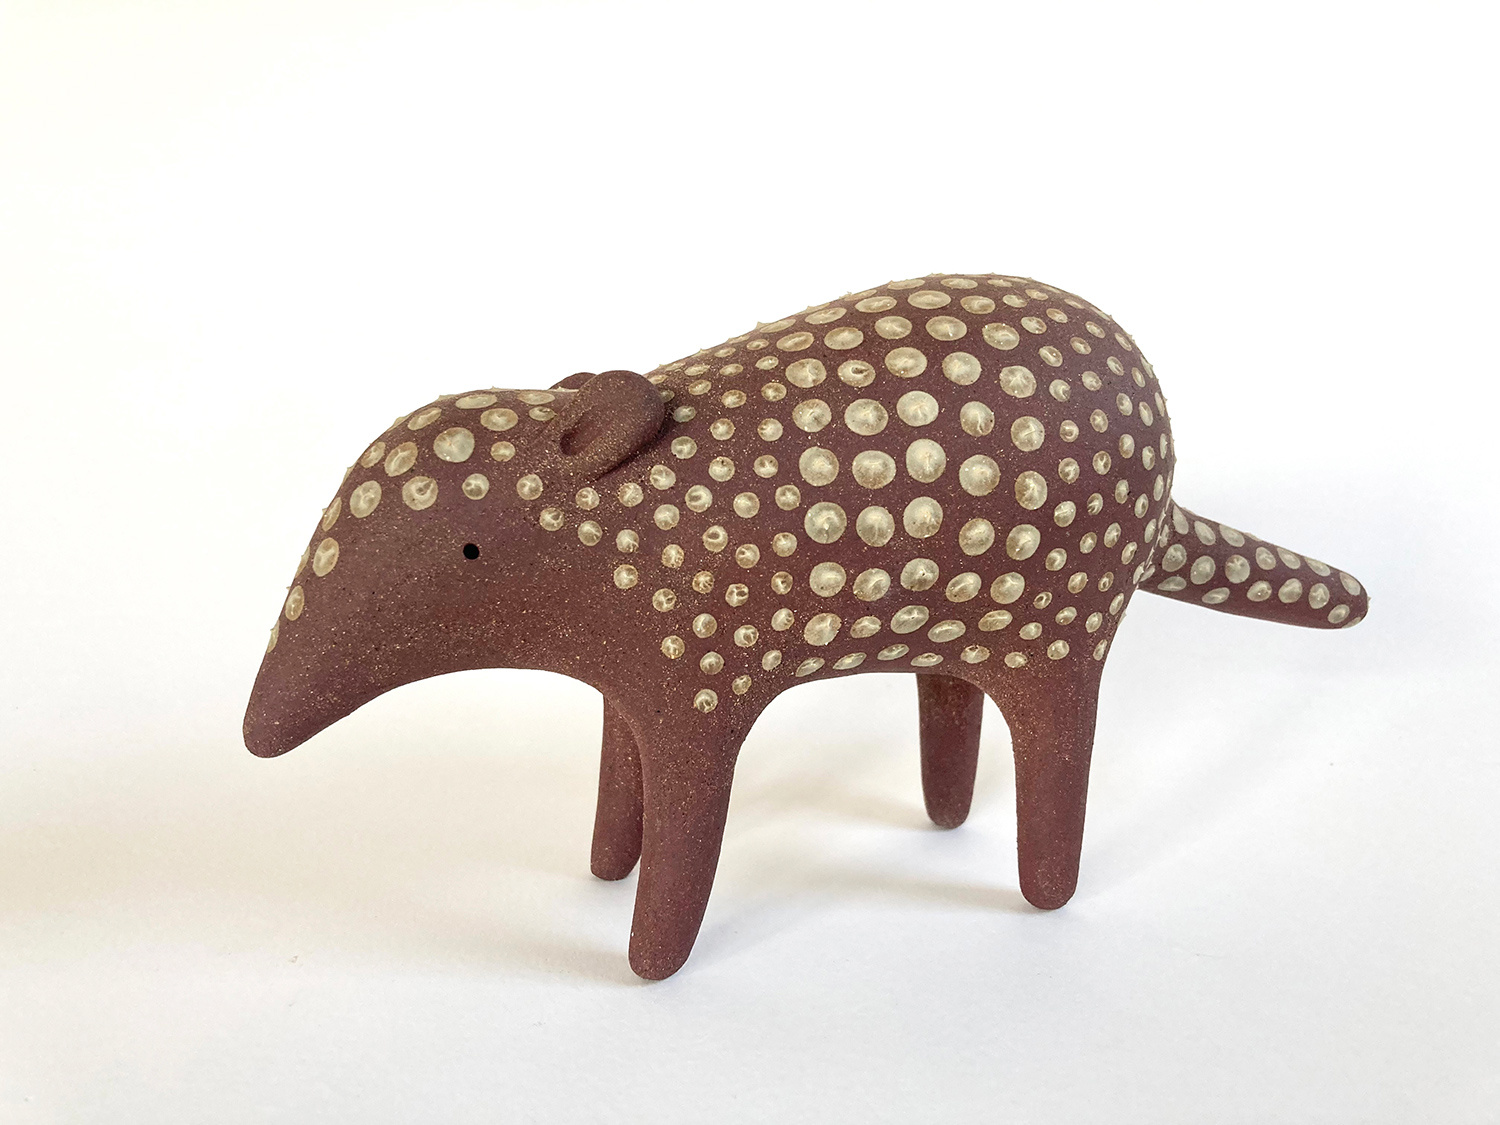 Armadillo by Russell Wilson